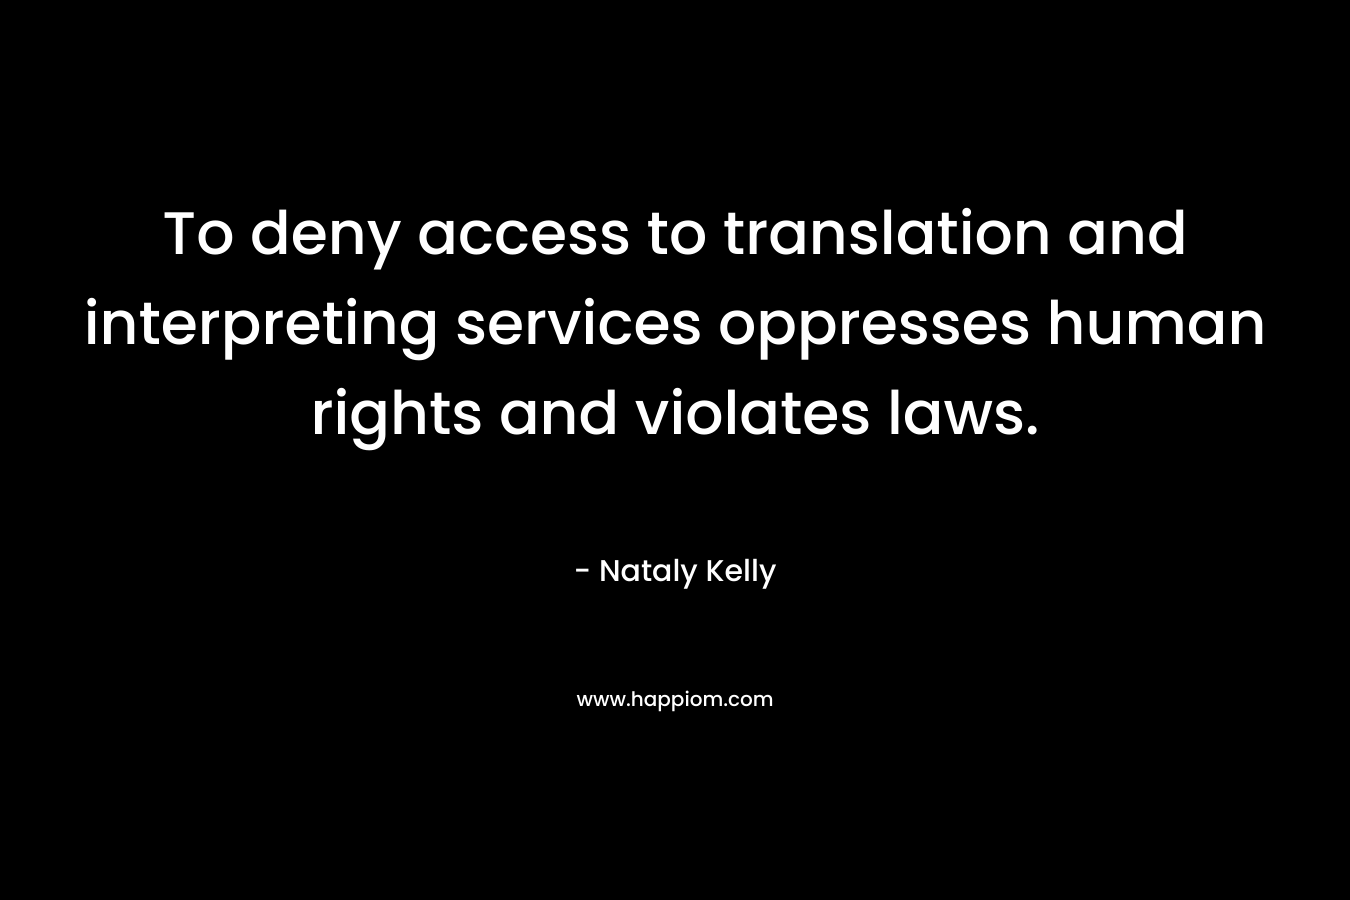 To deny access to translation and interpreting services oppresses human rights and violates laws. – Nataly Kelly